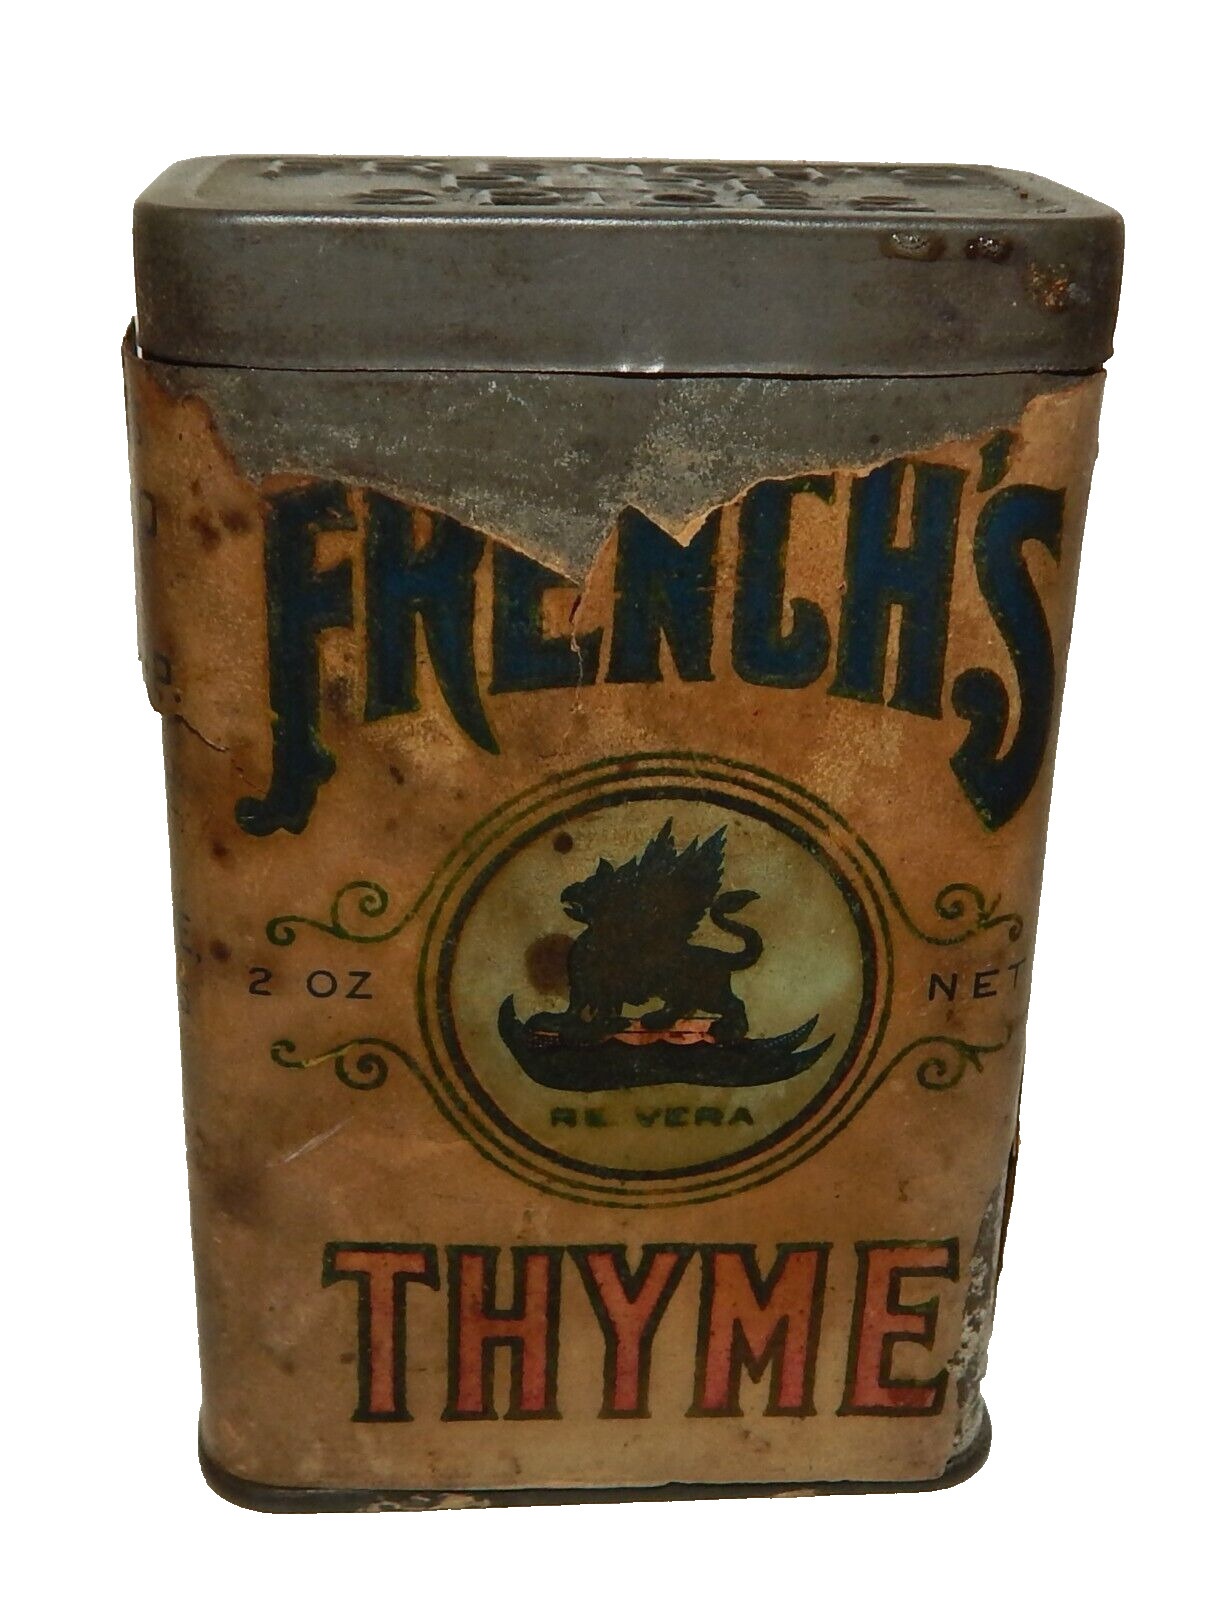 Vintage French's Pure Spice Thyme Metal Tin with Paper Label